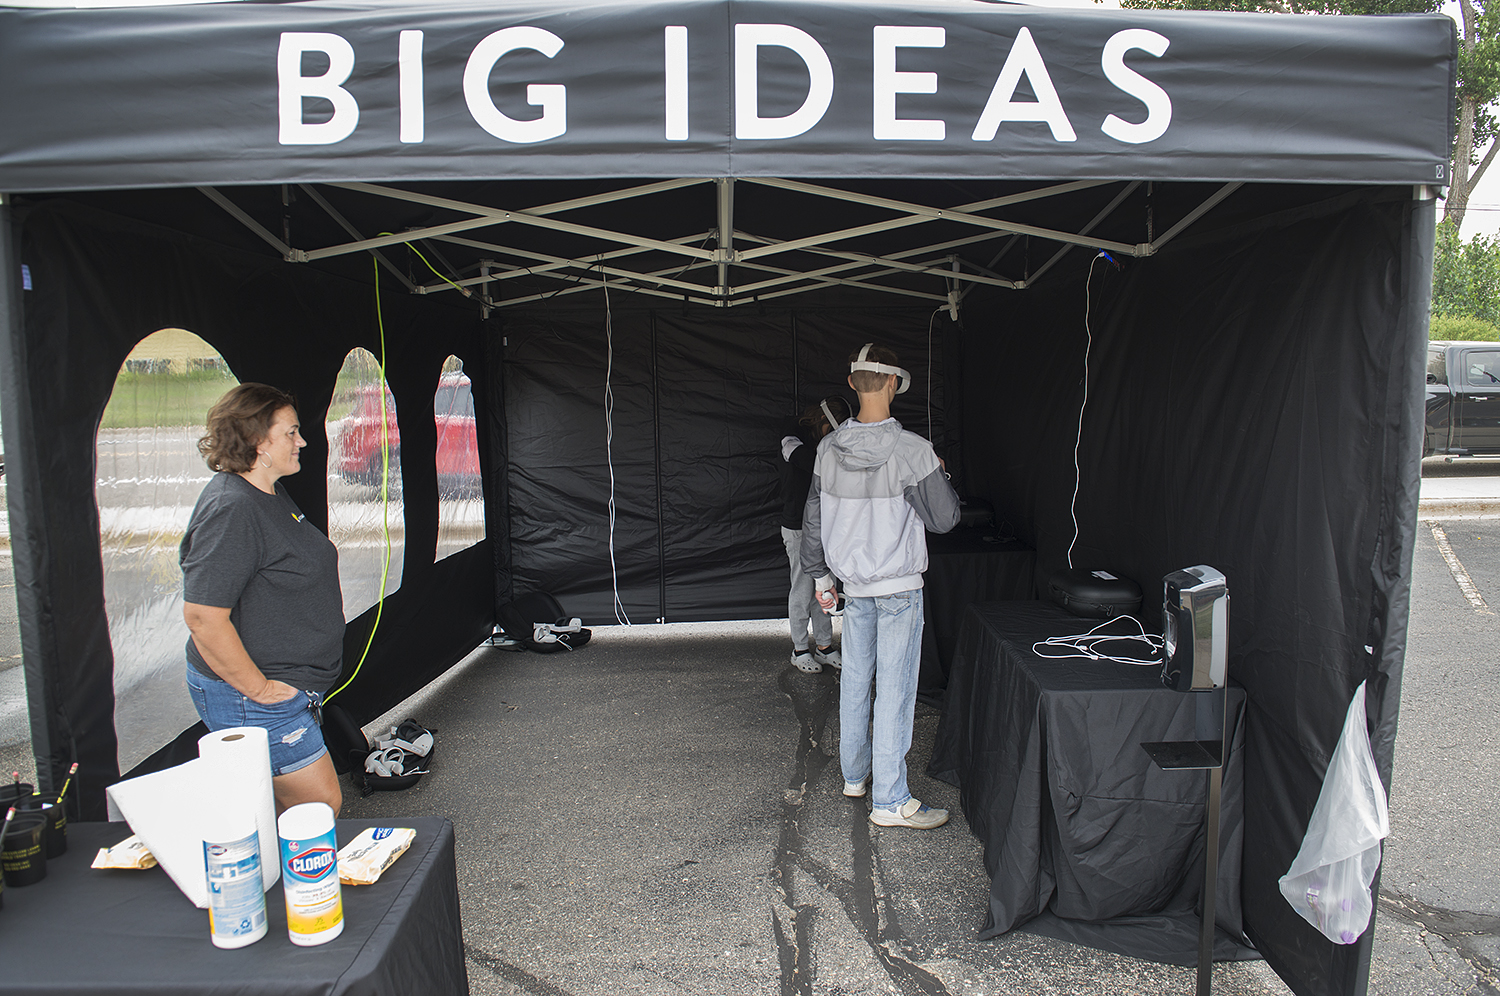 Attendees using equipment at the Big Ideas Road Show event.